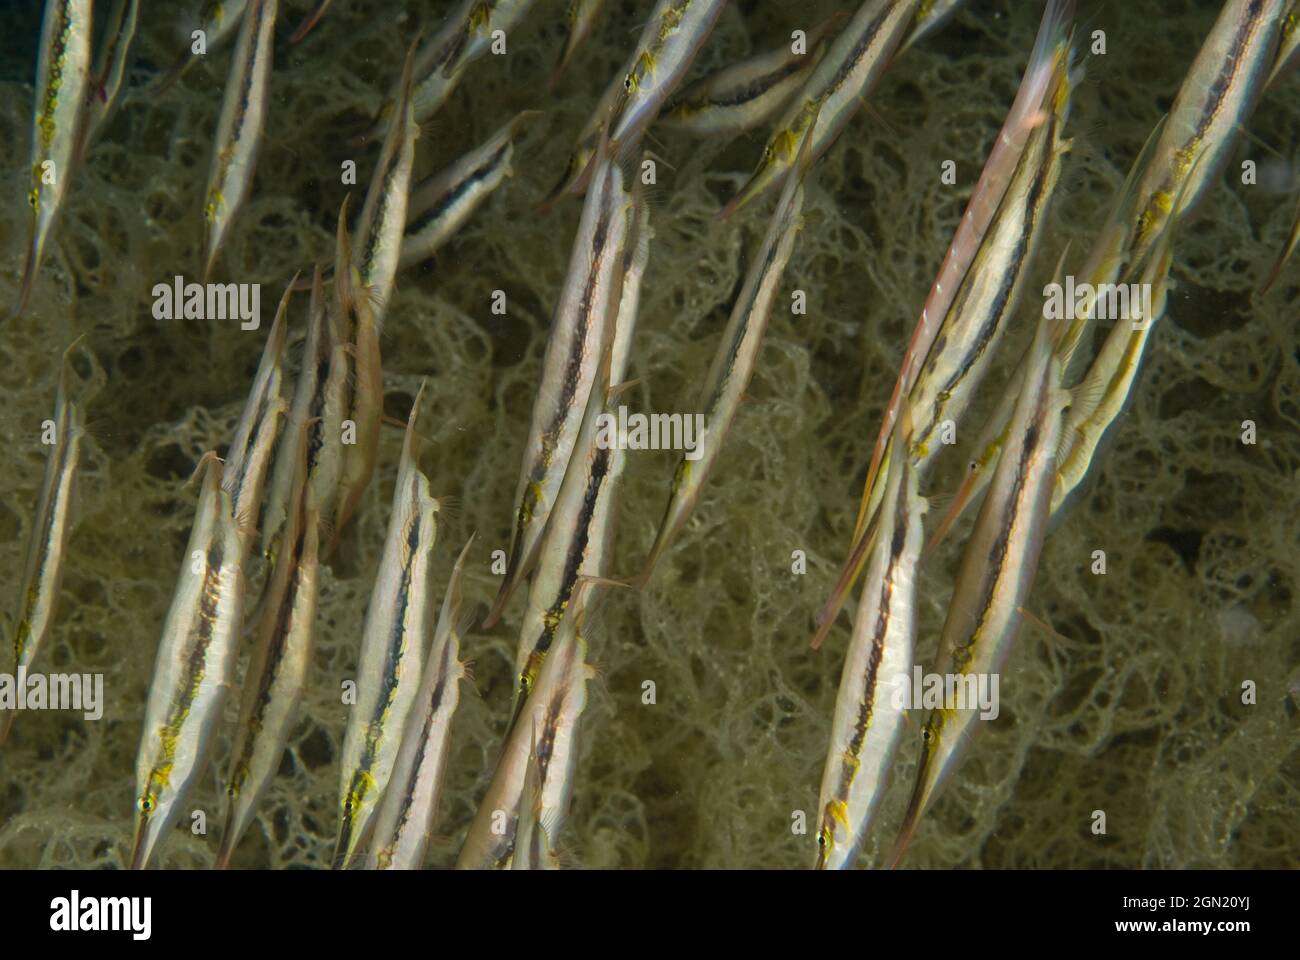 Razorfish (Aeoliscus strigatus), have very thin bodies and swim in small synchronised groups, each fish in a vertical position with its snout pointed Stock Photo